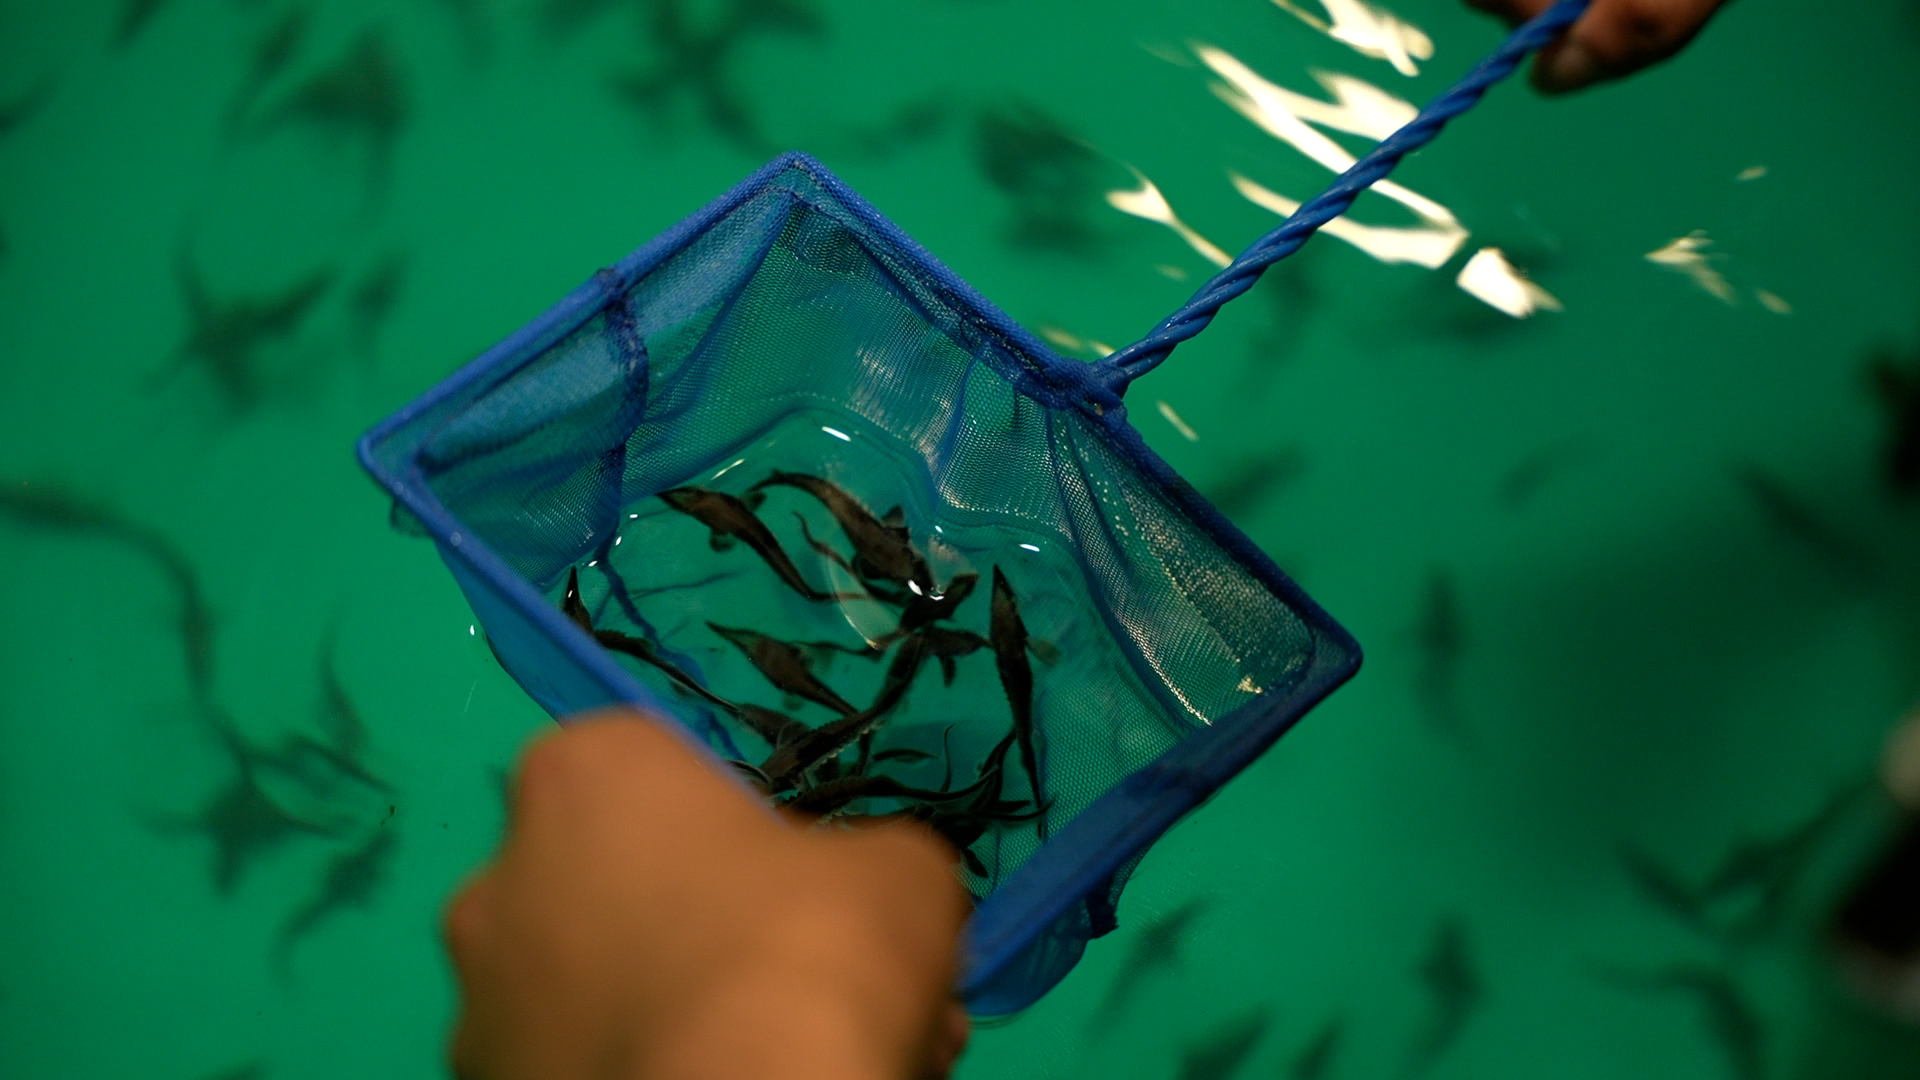 A small blue net holds a handful of pinky-sized lake sturgeon, which Deng researches in her lab.